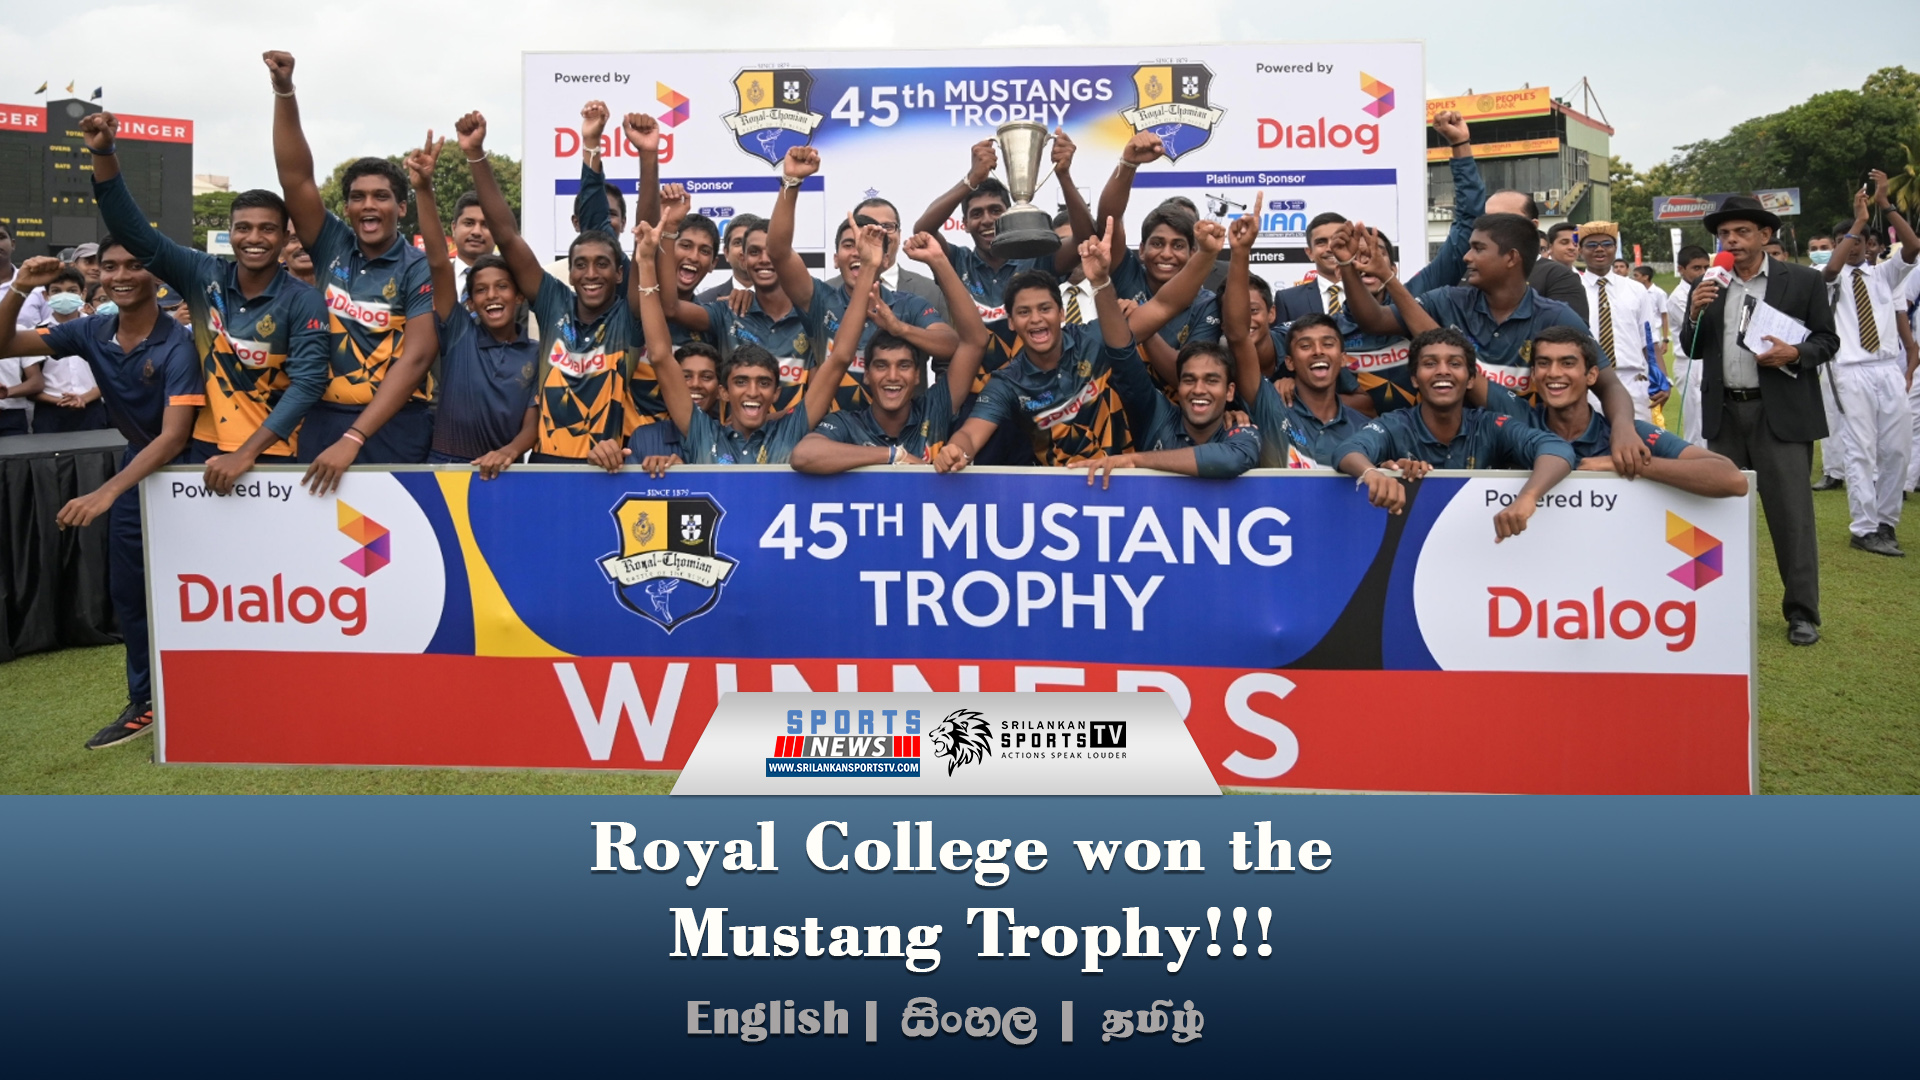 Royal College won the Mustang Trophy!!!